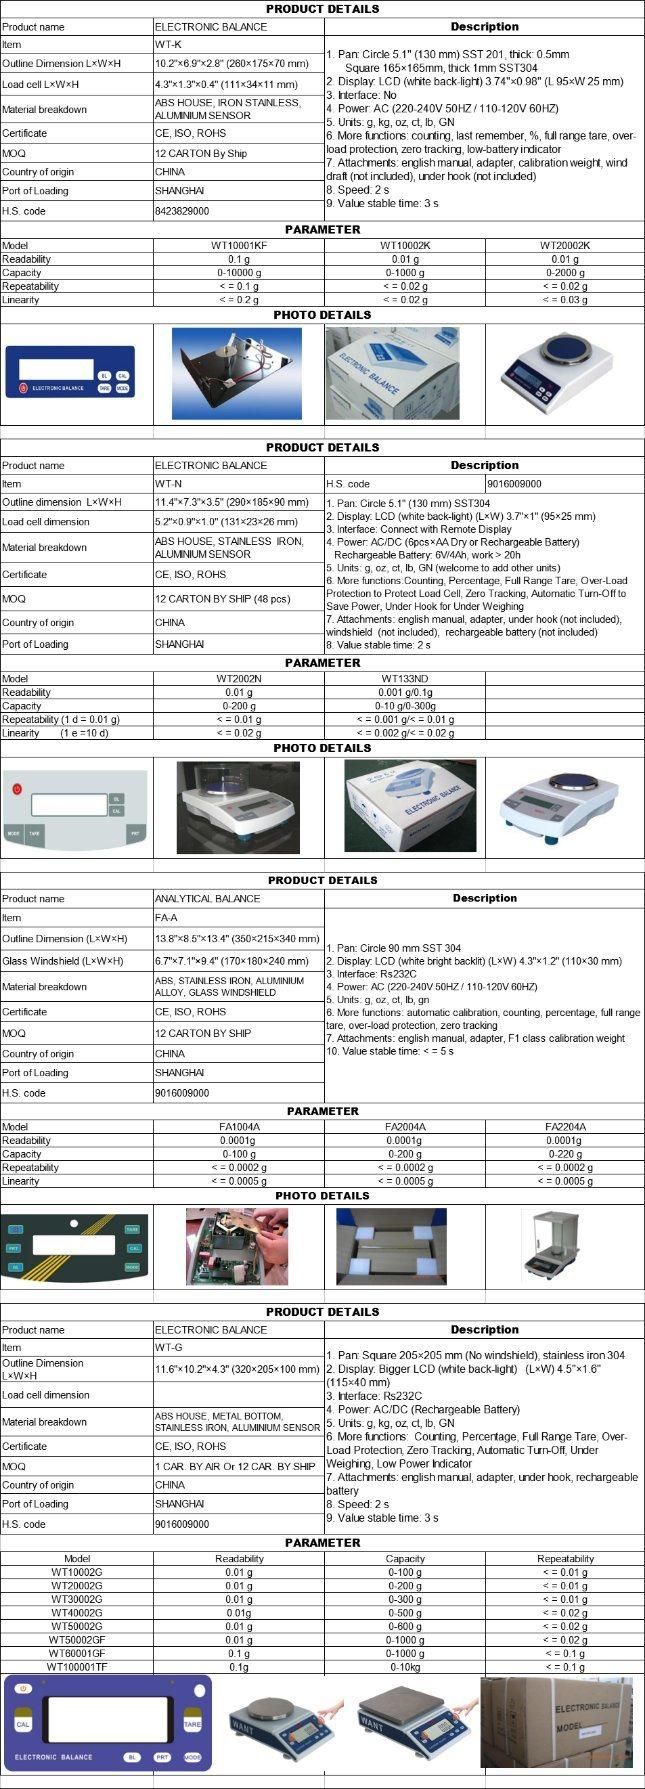 2 Kg 0.1g 0.01g Accuracy and Type Weighing Scales in China LED Display